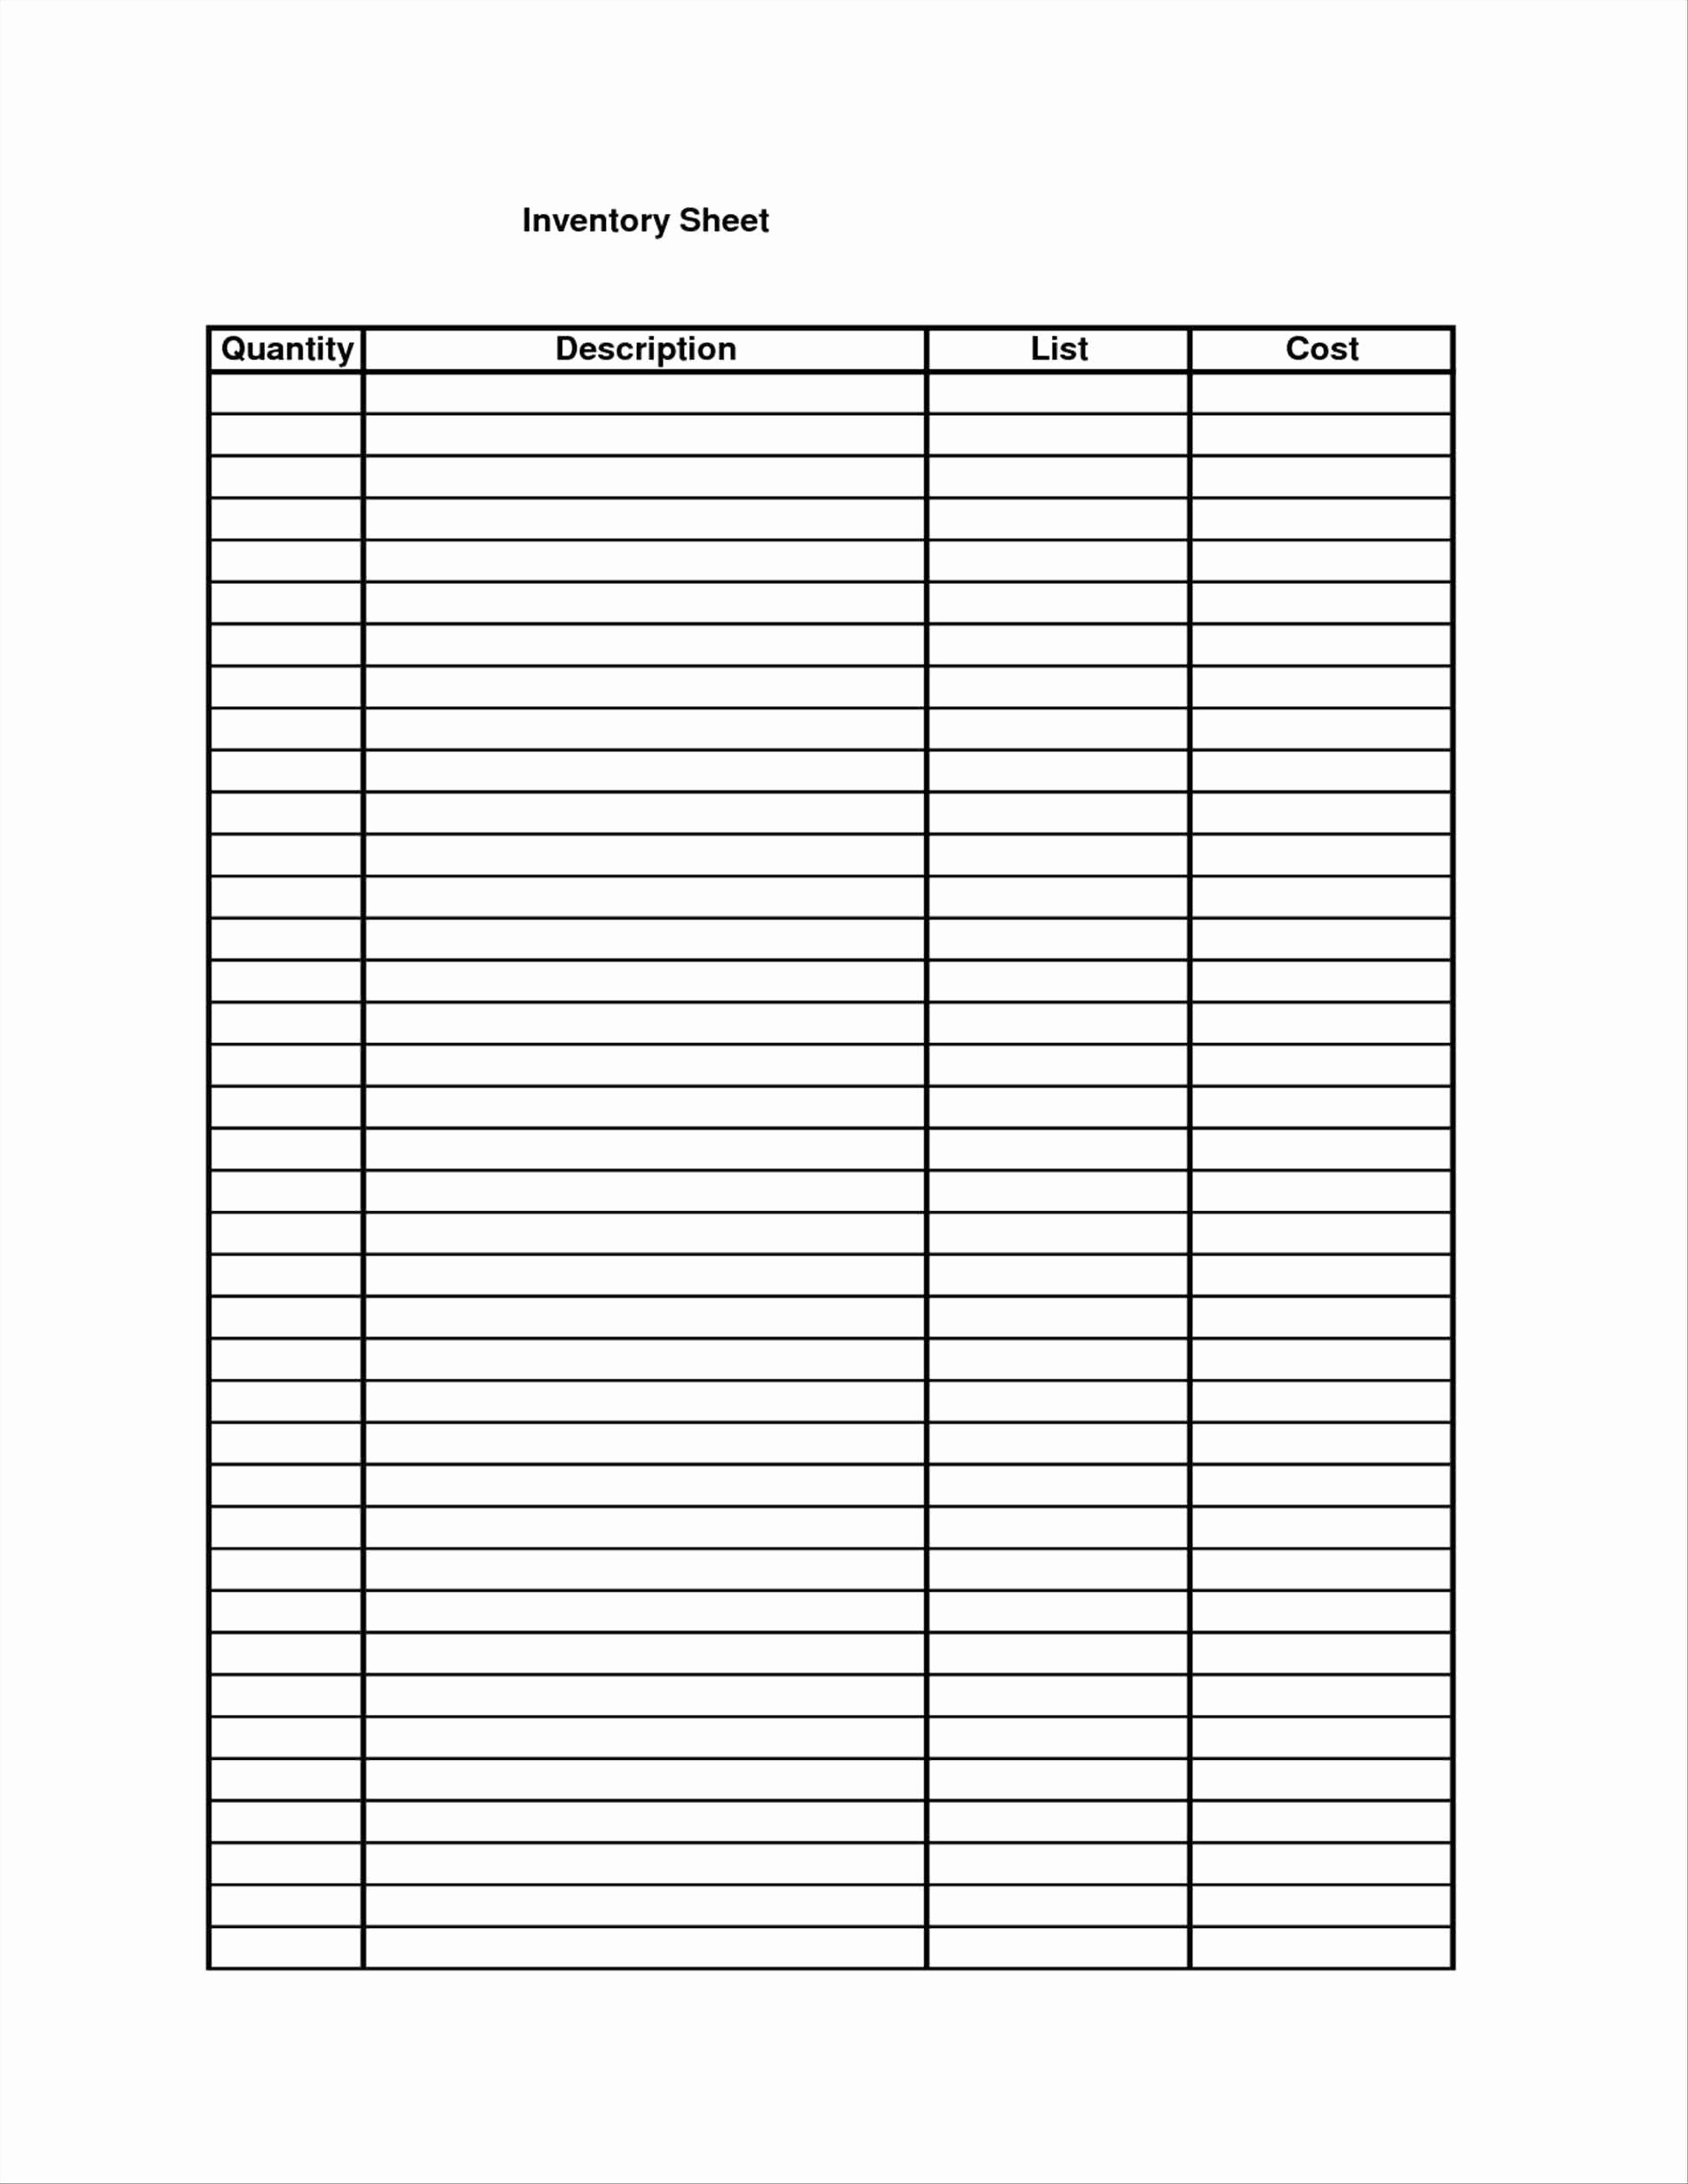 Physical Inventory Count Sheet Template Luxury Free Excel for Windows 10 Download Free Spreadsheets for